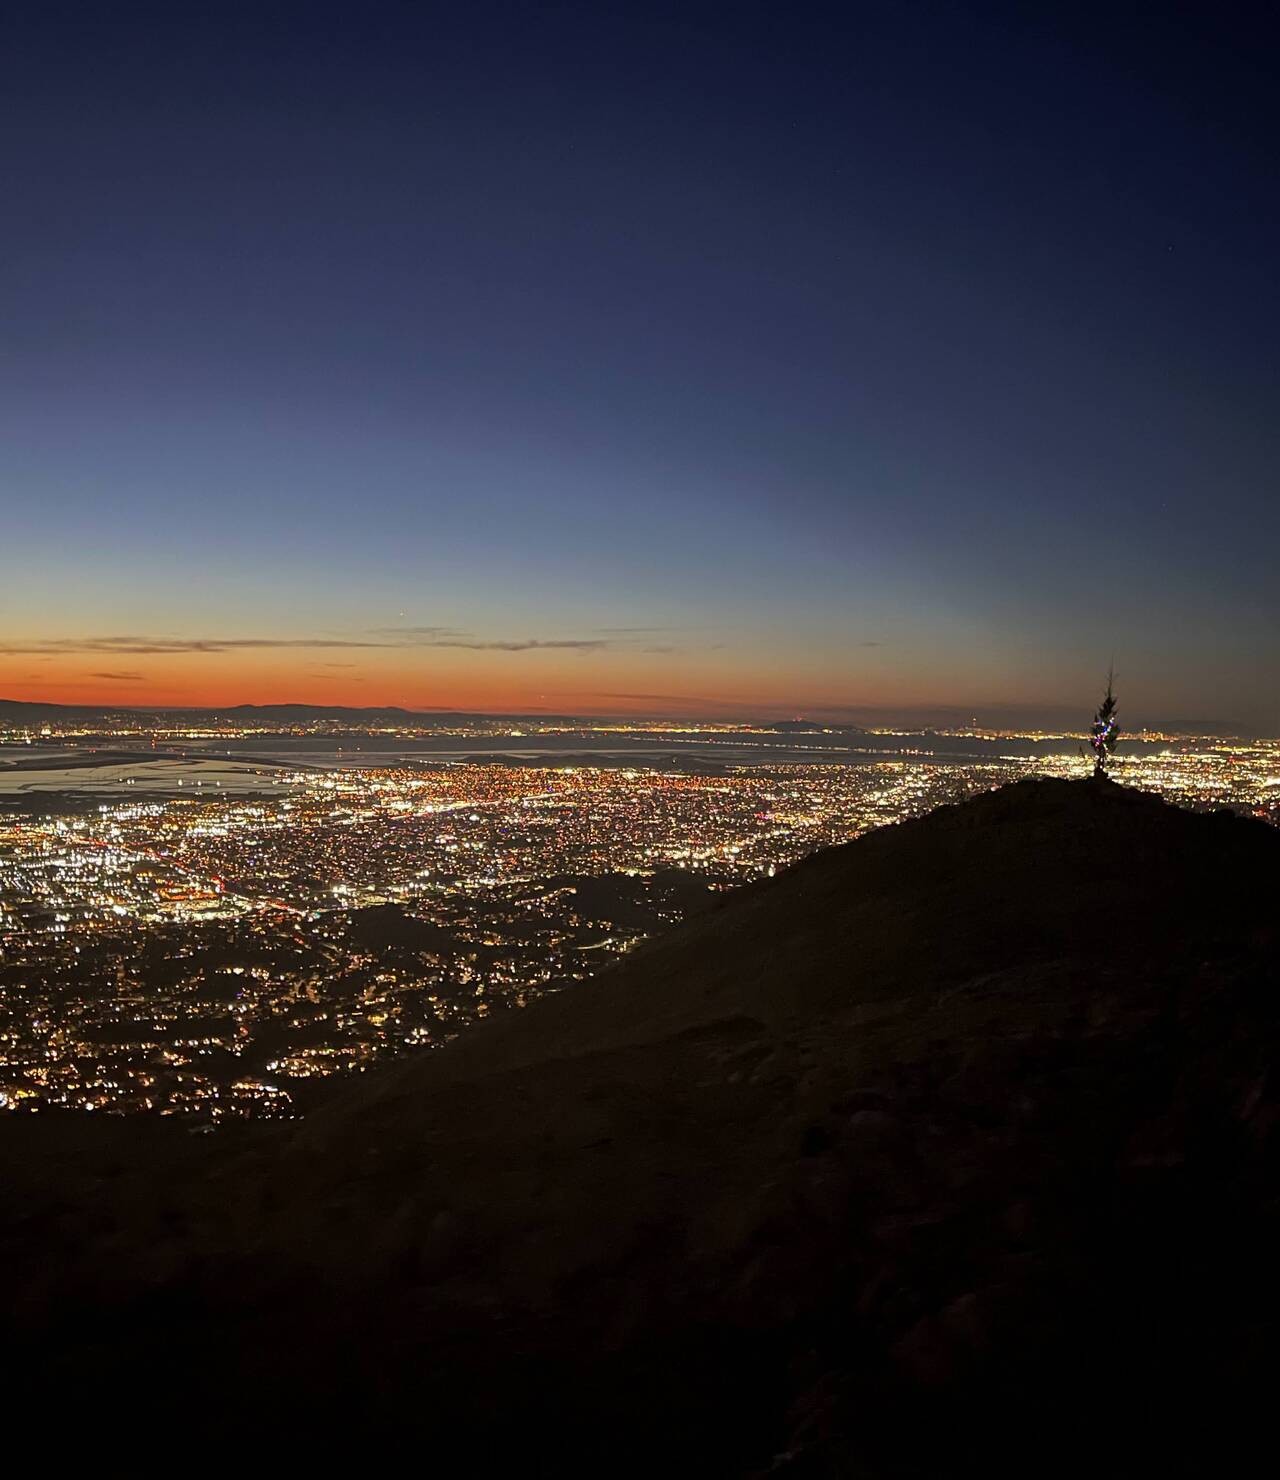 Looking over the top of Mission Peak, the sun glows orange and blue as the lights begin to illuminate the Bay Area